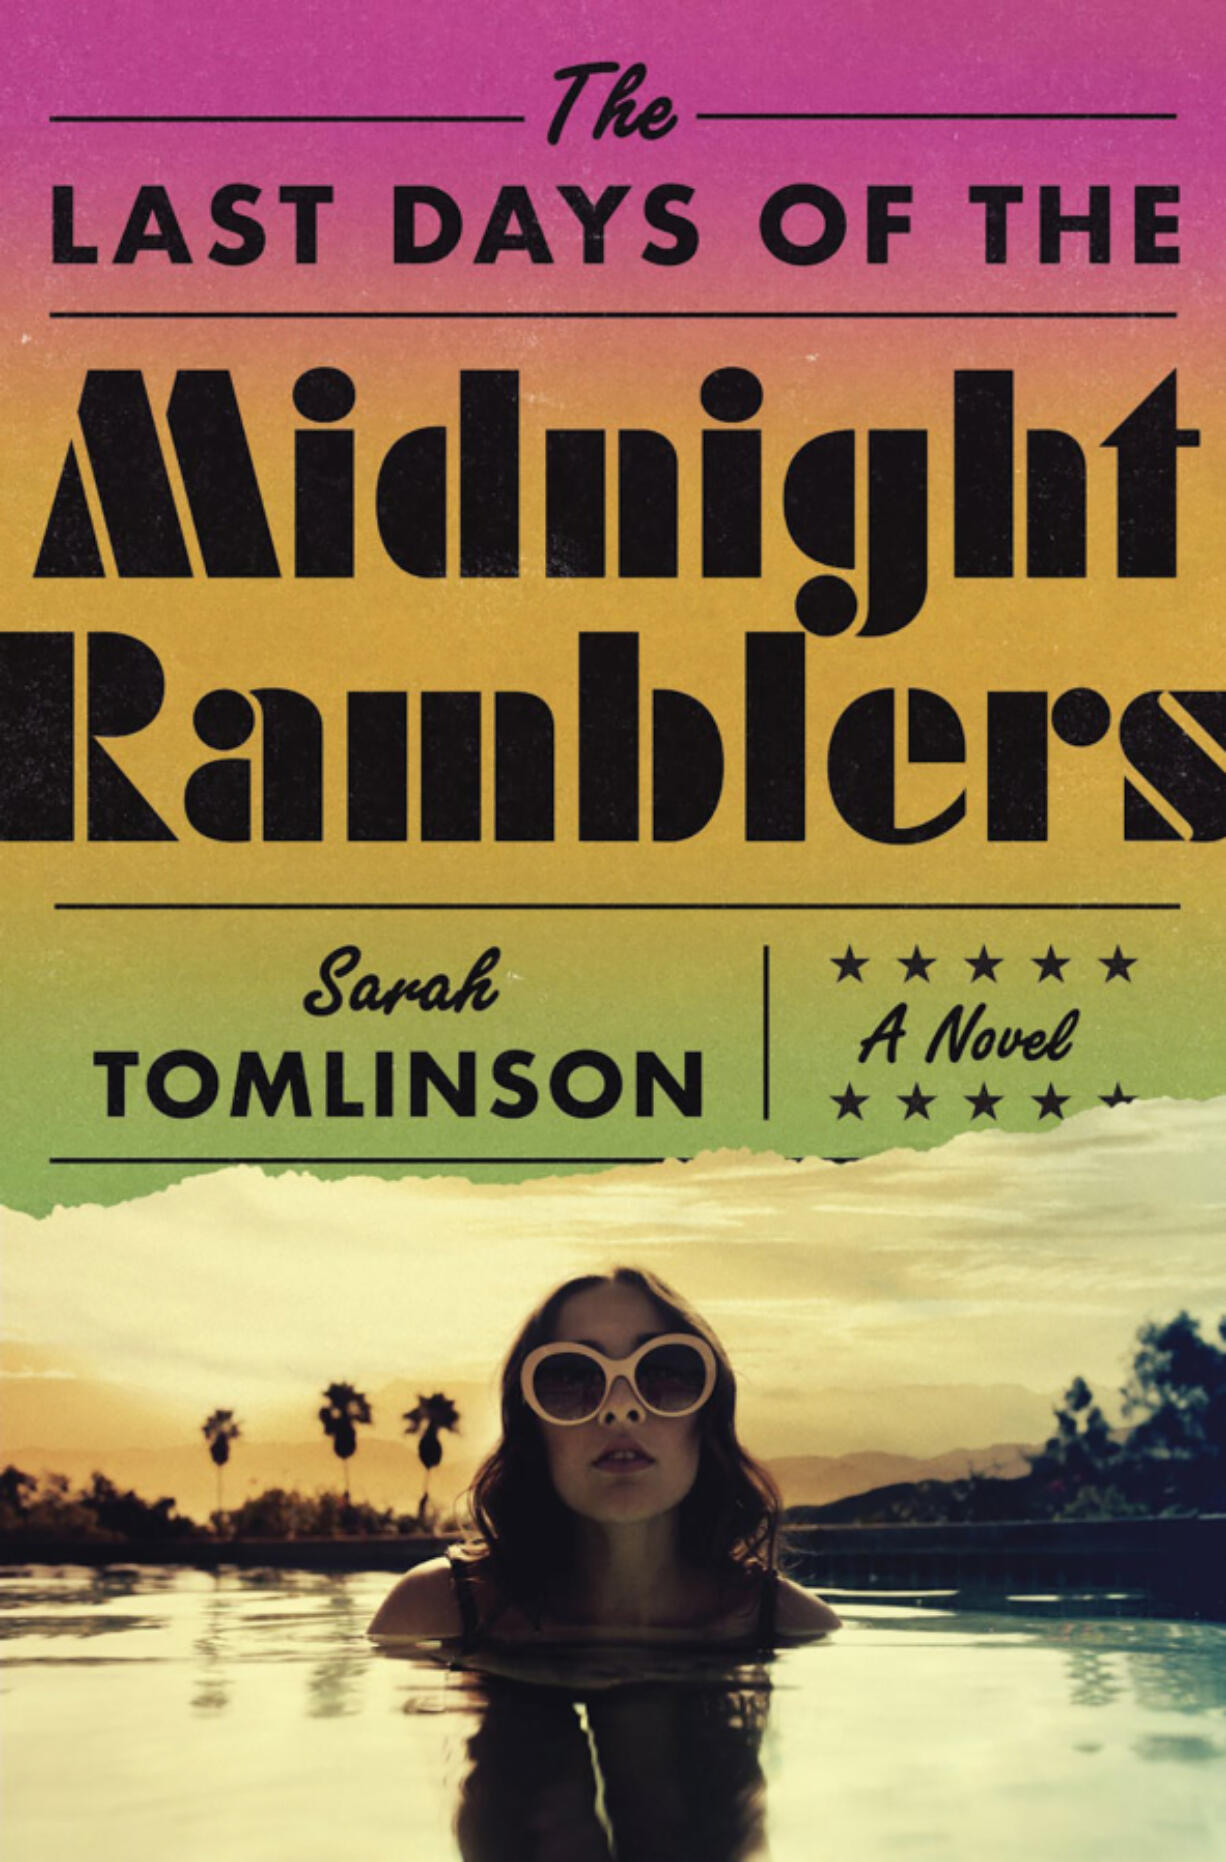 &ldquo;The Last Days of the Midnight Ramblers,&rdquo; by Sarah Tomlinson (Macmillan Publishers)